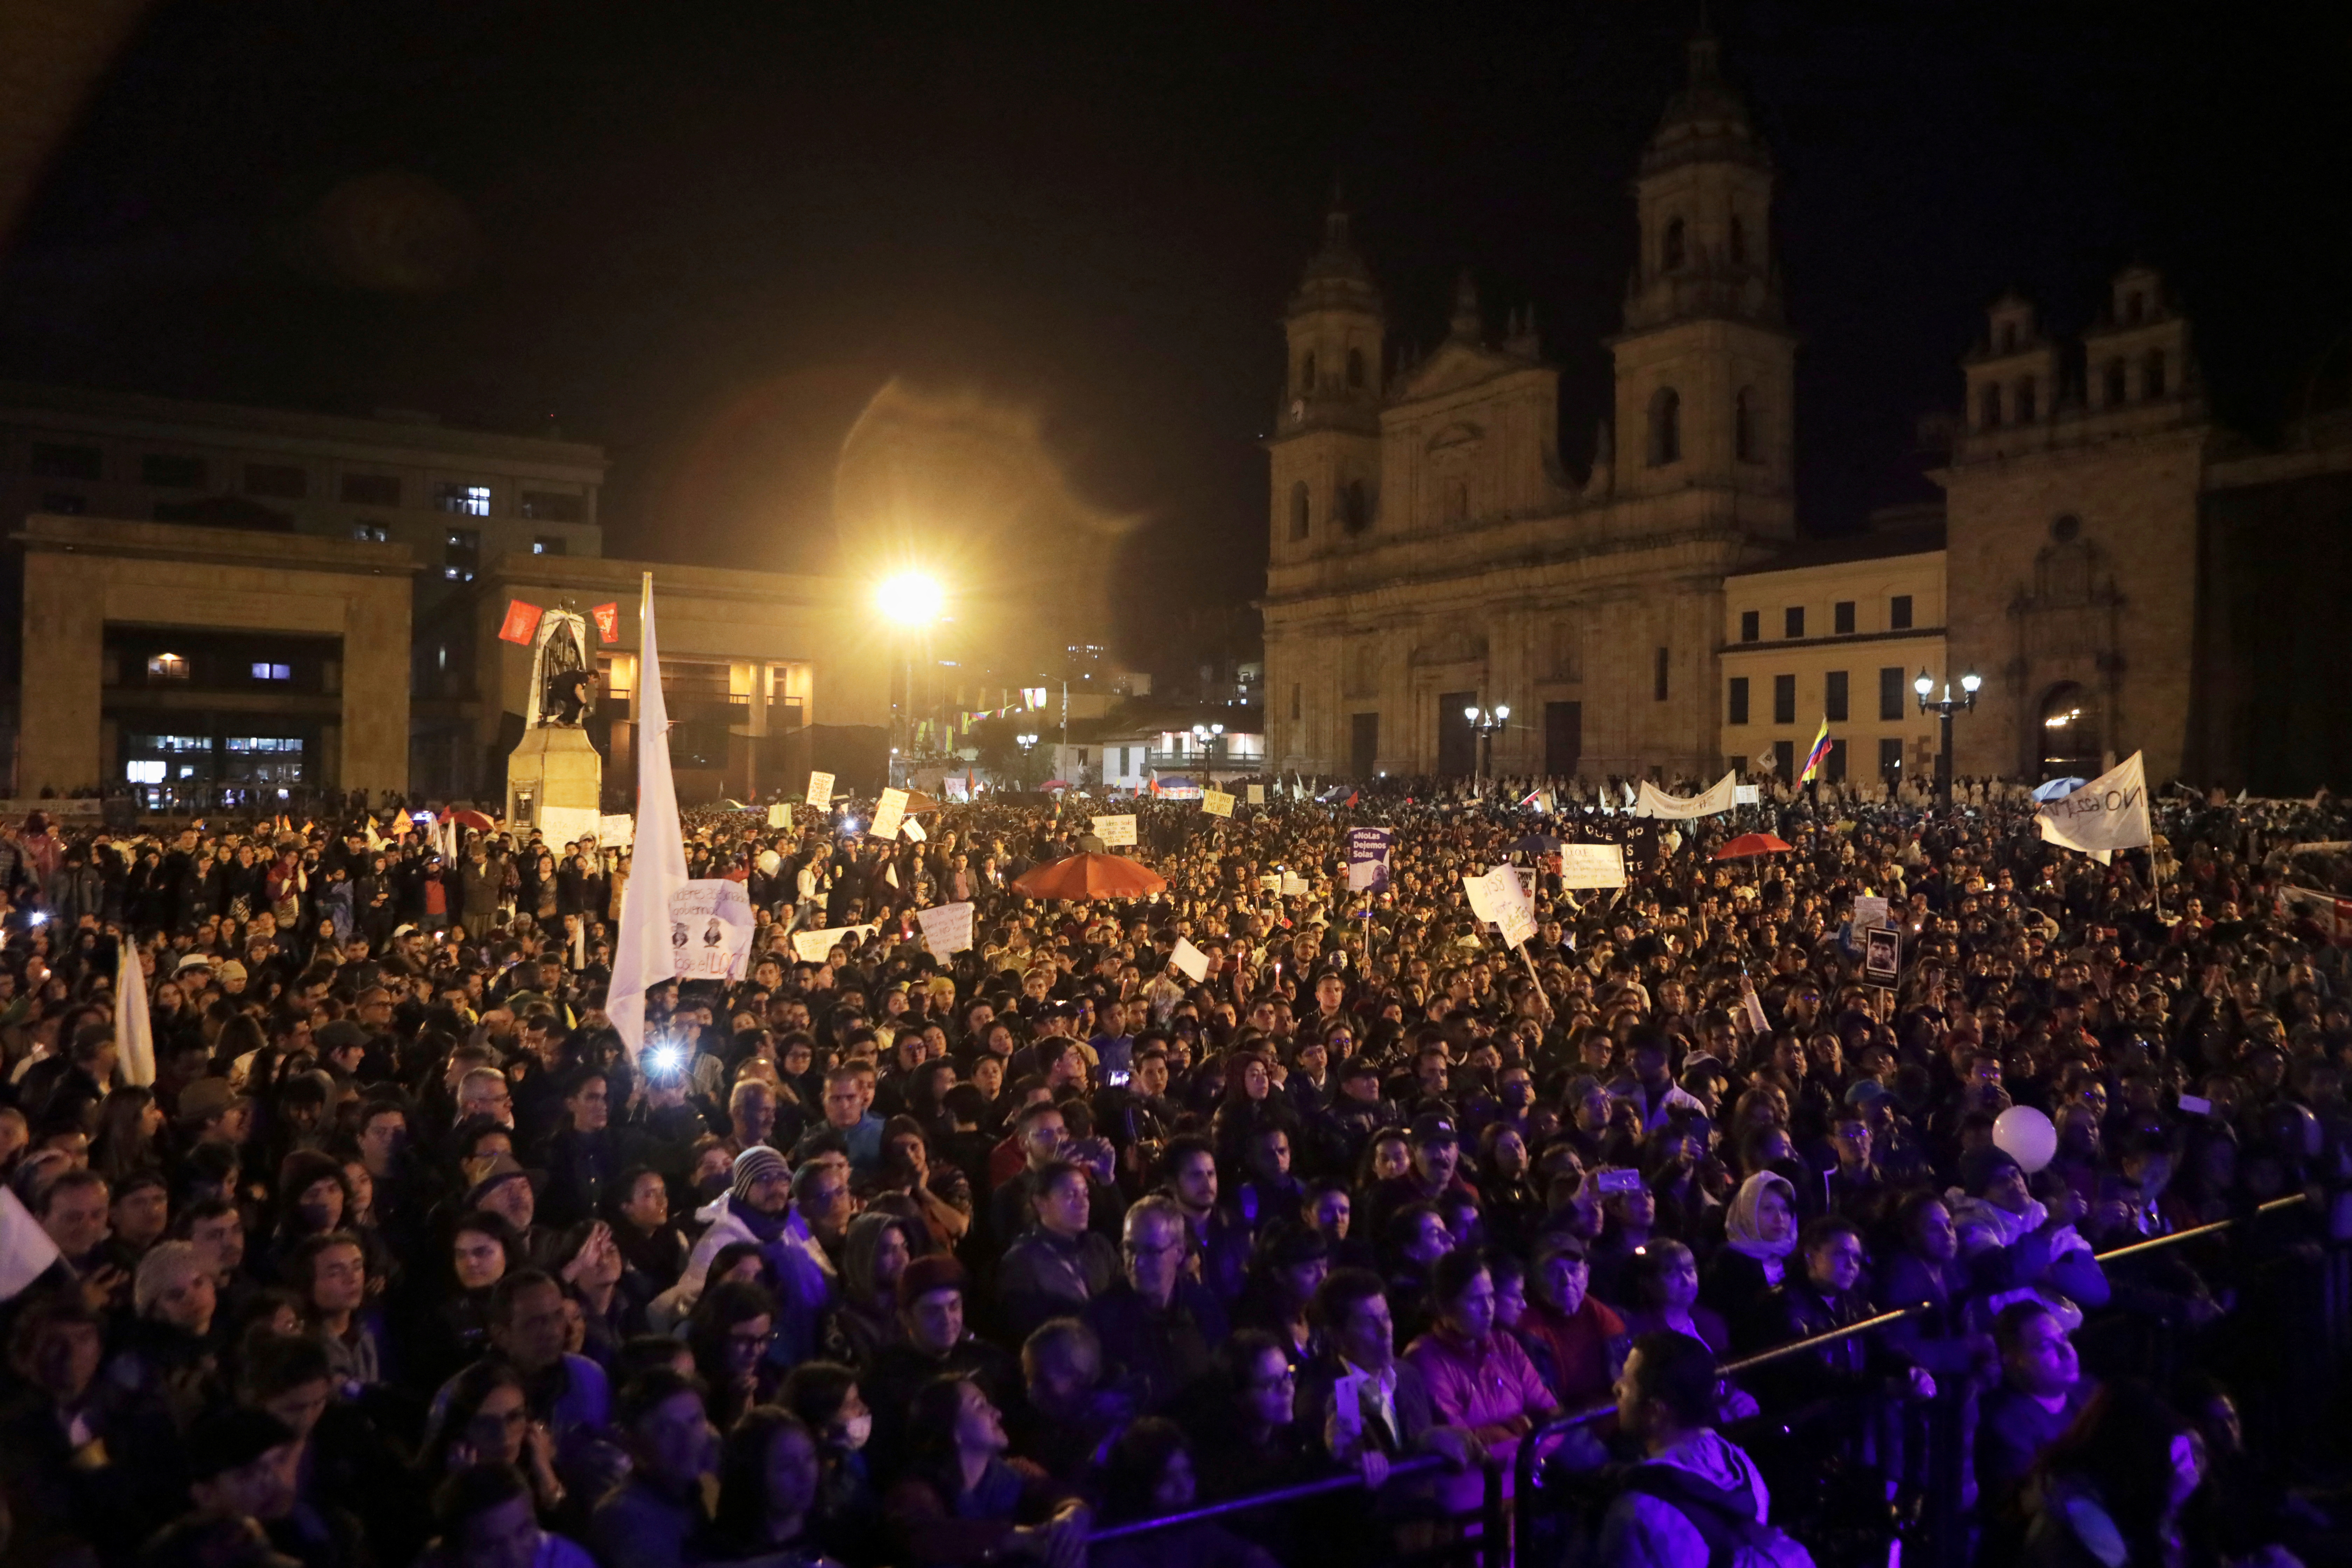 People gather for a protest against the killing of social activists, at the Plaza de Bolivar in Bogota